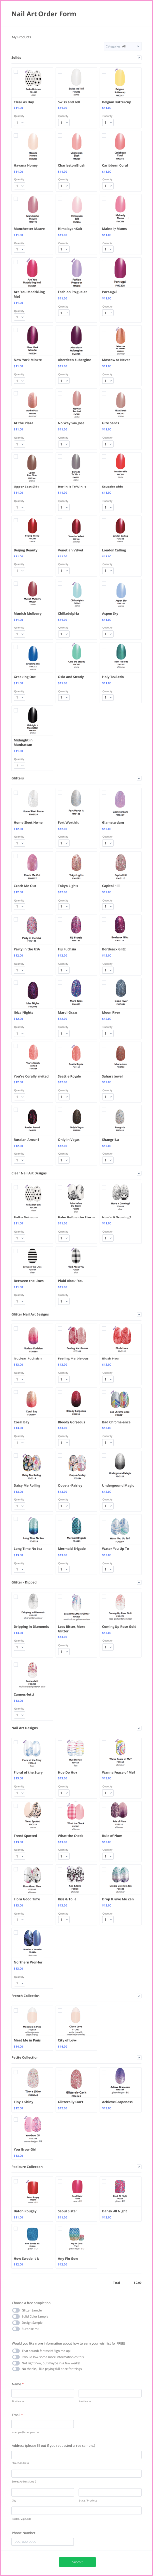 Nail Art Order Form Template